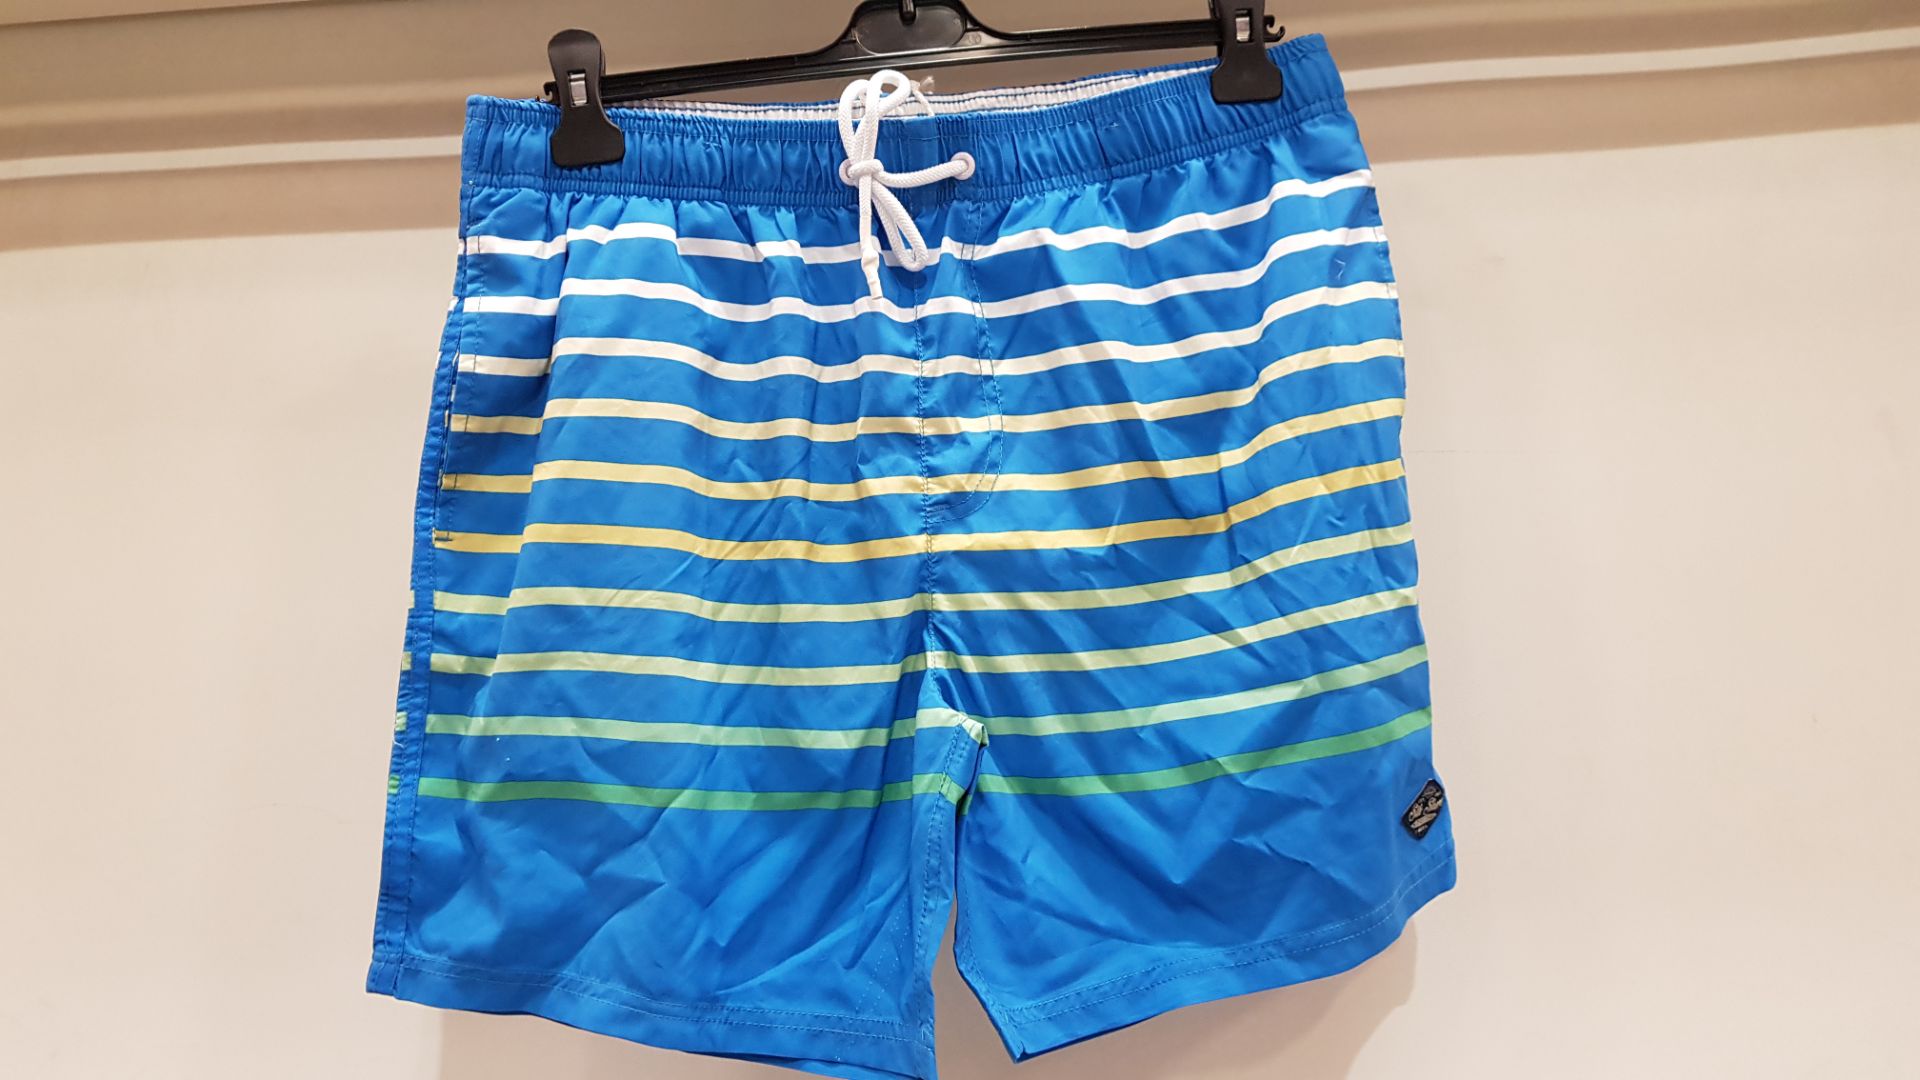 12 X BRAND NEW SOUTH BEACH MEN'S SWIM SHORTS IN BLUE SIZES 6 L AND 6 XL - RRP TOTAL £227.88